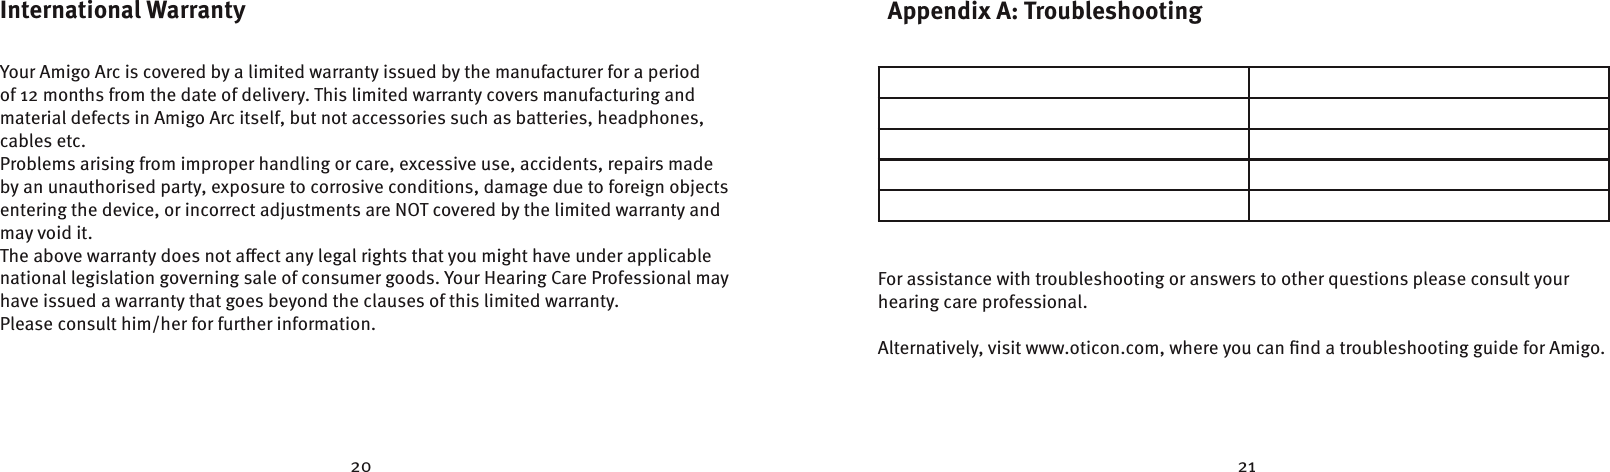 20 21 Appendix A: TroubleshootingFor assistance with troubleshooting or answers to other questions please consult your  hearing care professional.Alternatively, visit www.oticon.com, where you can ﬁnd a troubleshooting guide for Amigo.International WarrantyYour Amigo Arc is covered by a limited warranty issued by the manufacturer for a period  of 12 months from the date of delivery. This limited warranty covers manufacturing and  material defects in Amigo Arc itself, but not accessories such as batteries, headphones, cables etc. Problems arising from improper handling or care, excessive use, accidents, repairs made by an unauthorised party, exposure to corrosive conditions, damage due to foreign objects entering the device, or incorrect adjustments are NOT covered by the limited warranty and may void it.The above warranty does not aect any legal rights that you might have under applicable national legislation governing sale of consumer goods. Your Hearing Care Professional may have issued a warranty that goes beyond the clauses of this limited warranty.Please consult him/her for further information.